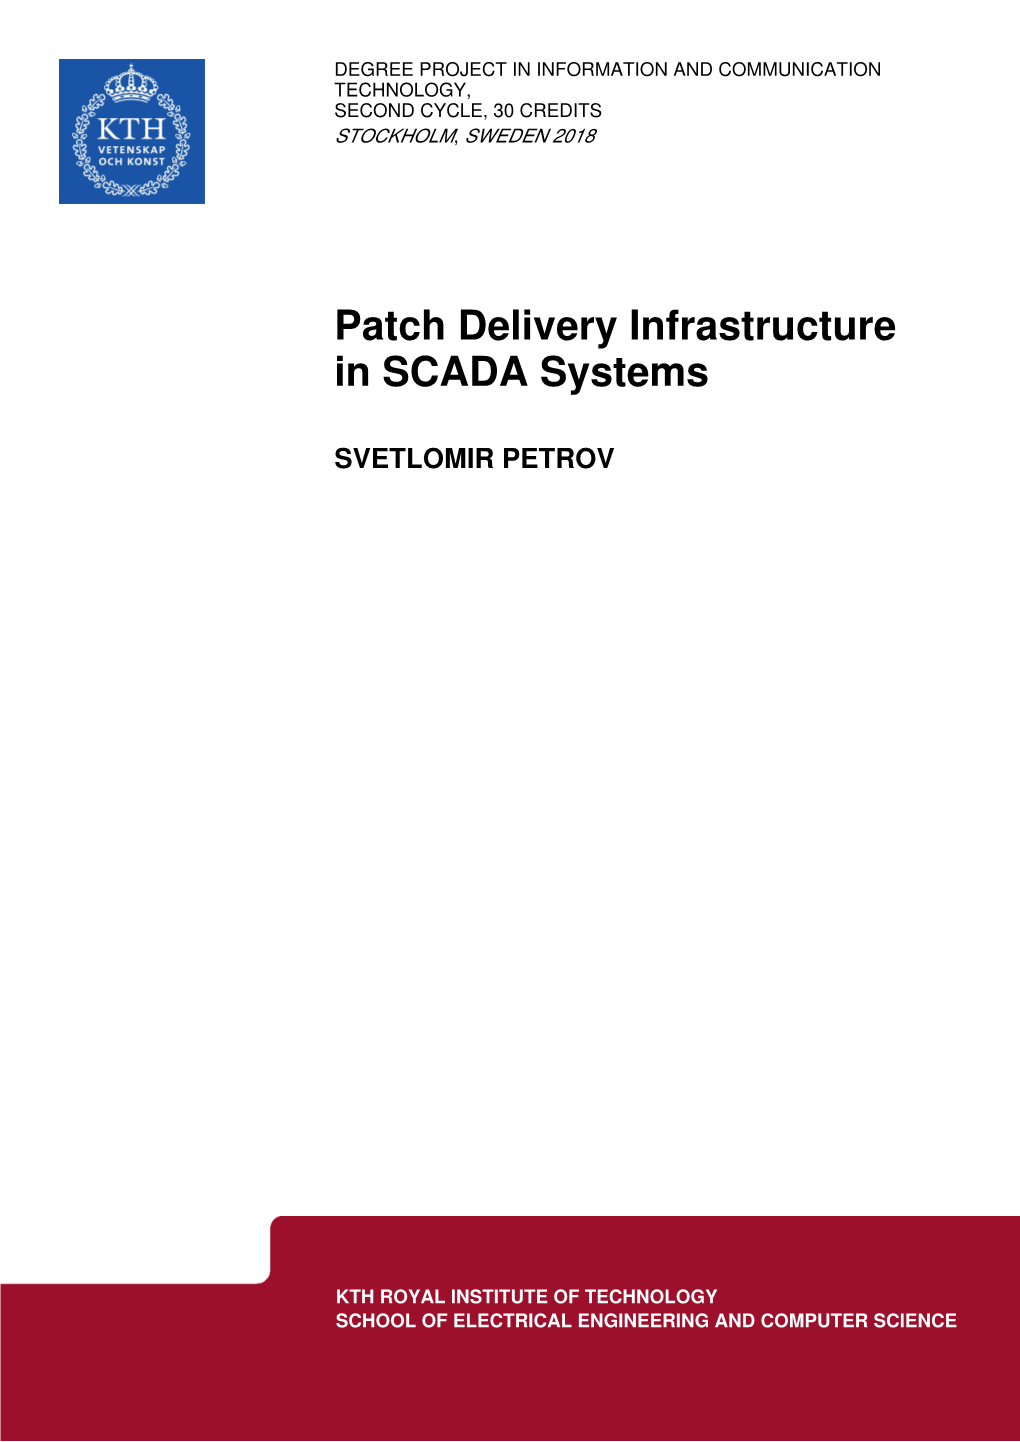 Patch Delivery Infrastructure in SCADA Systems